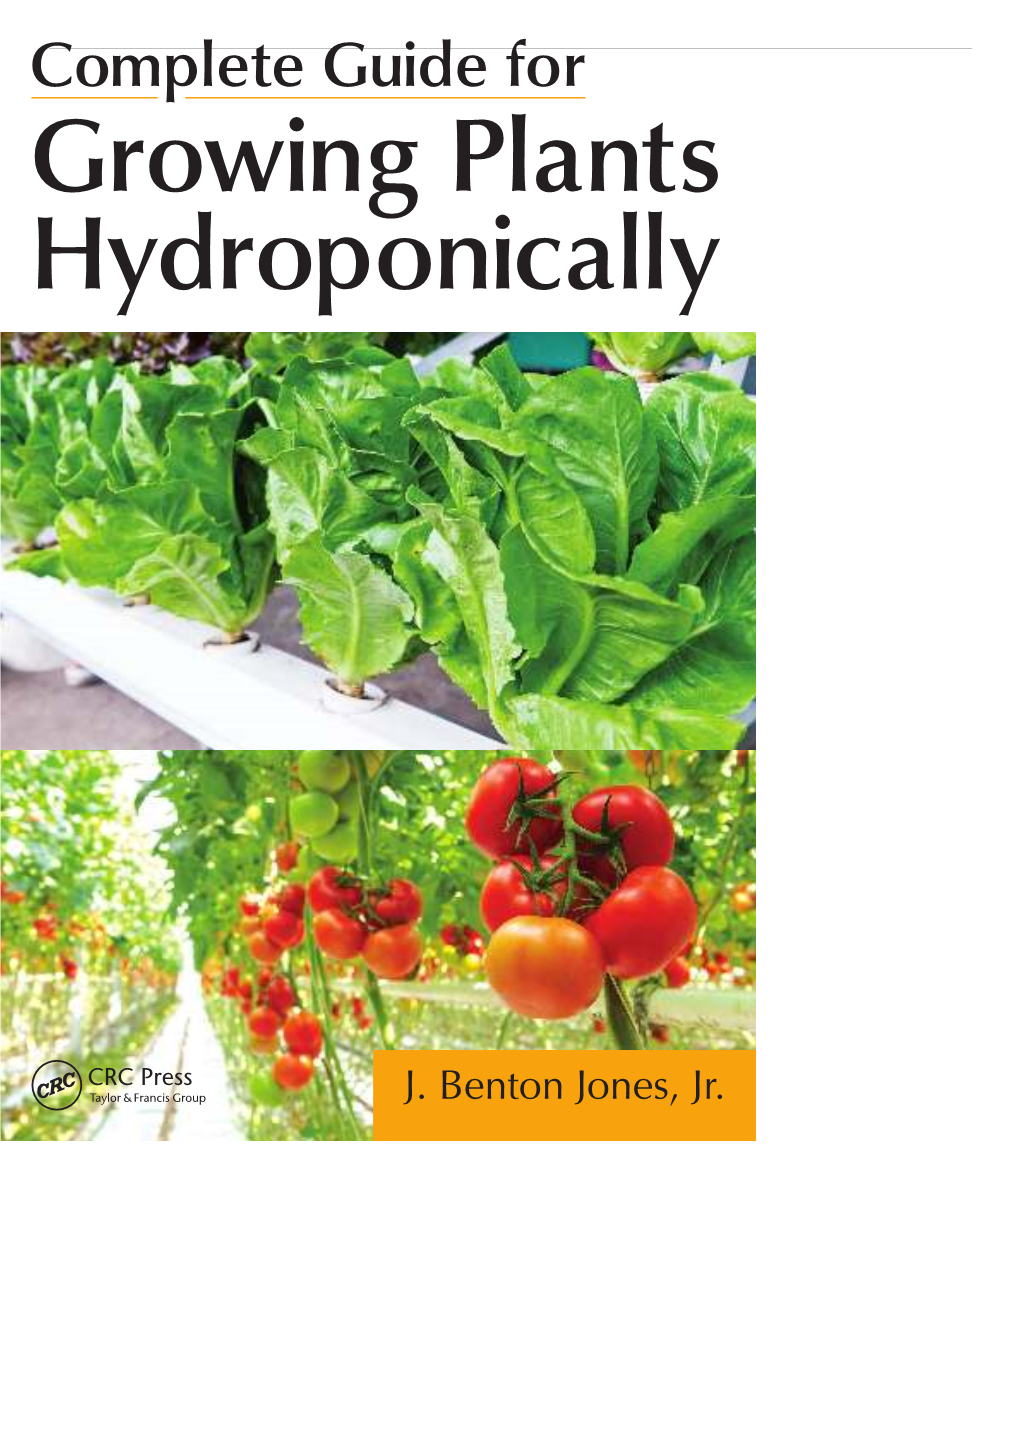 Complete Guide for Growing Plants Hydroponically Completeguide Forgrowing Plants Hydroponically Growing Plants